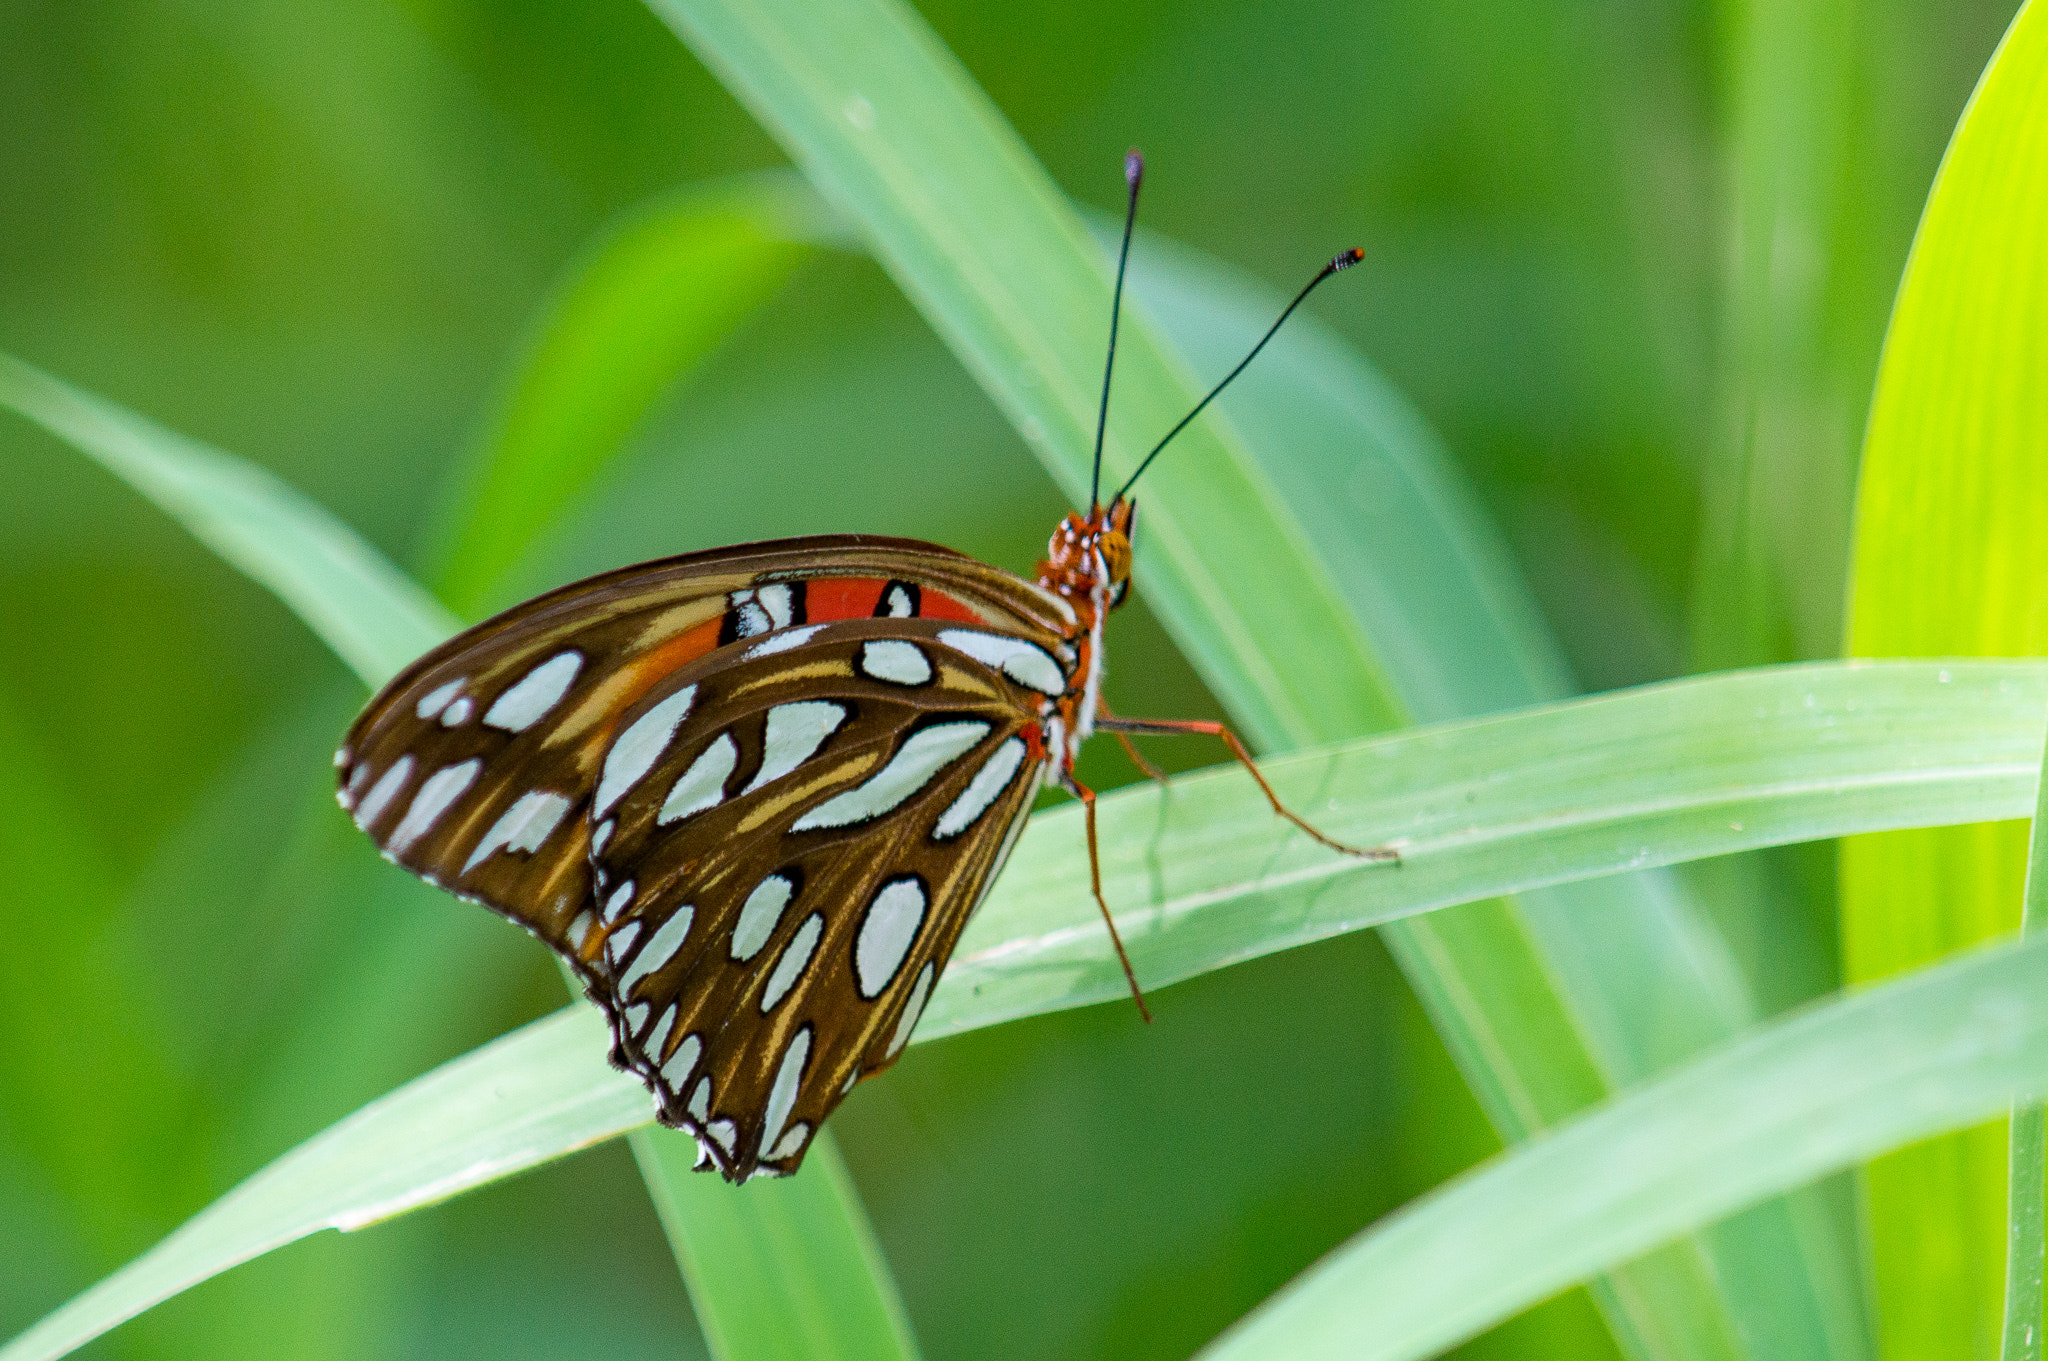 Sony SLT-A57 sample photo. Gulf fritillary butterfly in tall grass photography